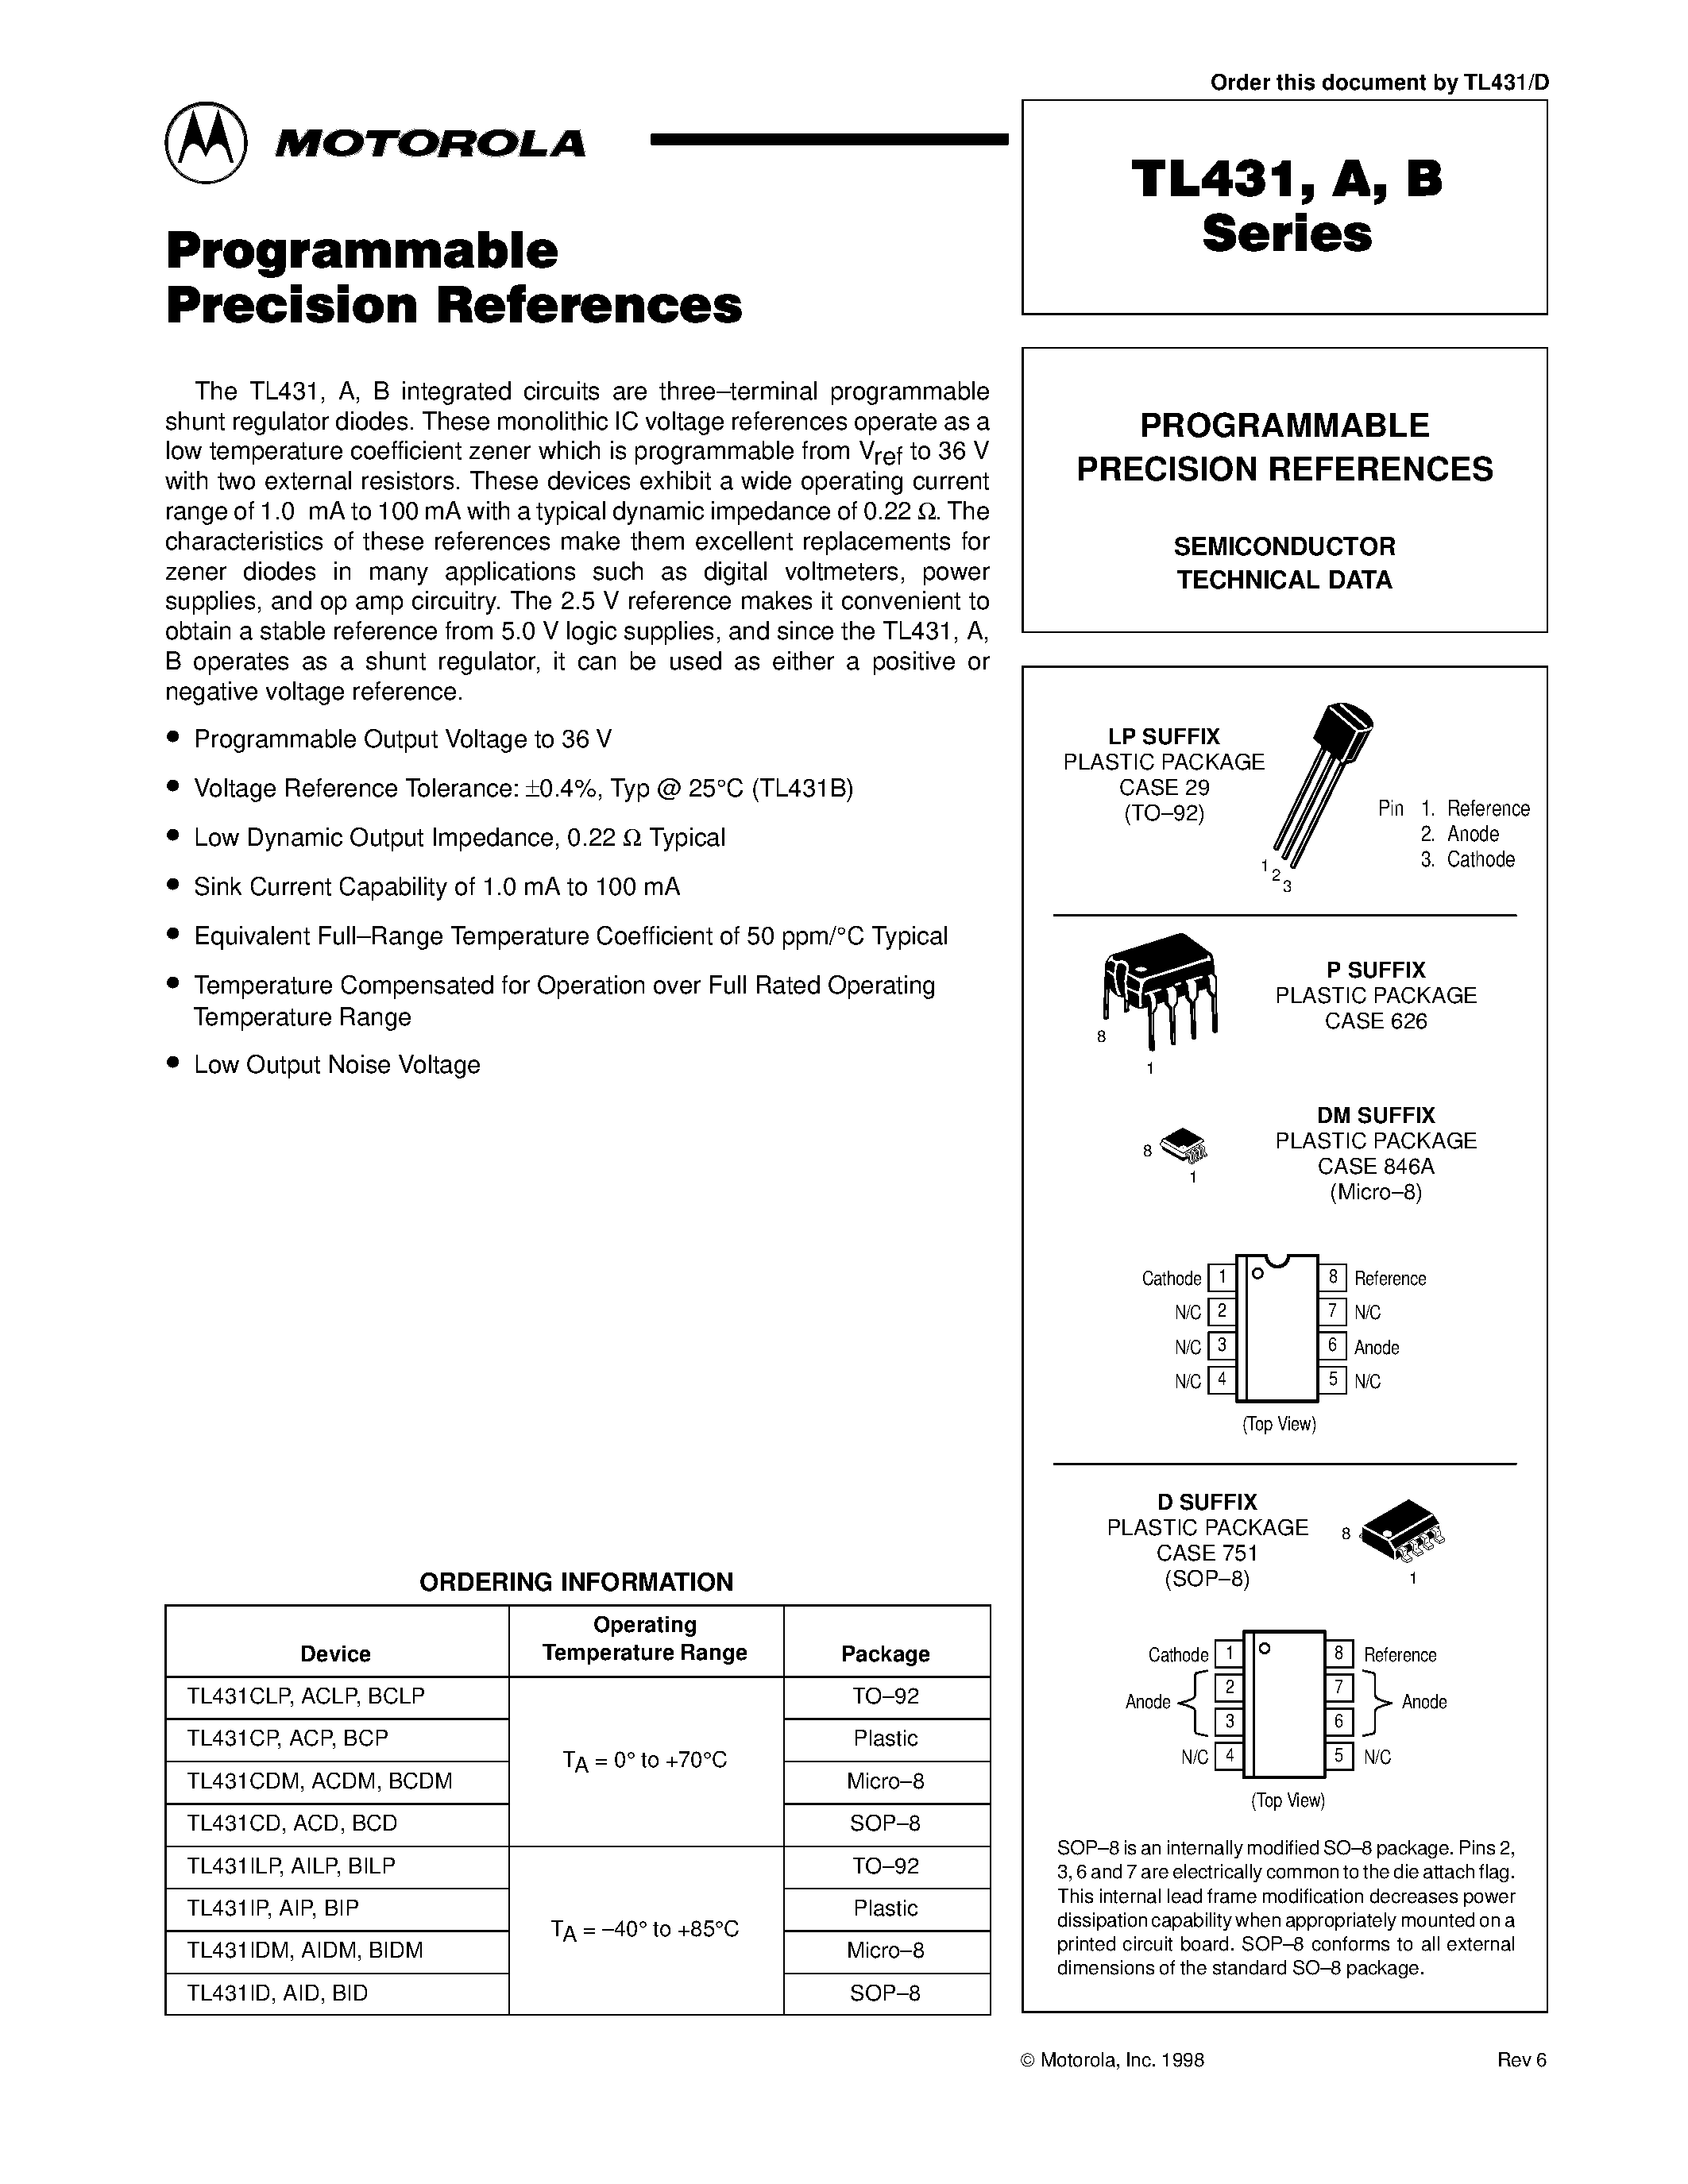 Datasheet TL431IP - PROGRAMMABLE PRECISION REFERENCES page 1